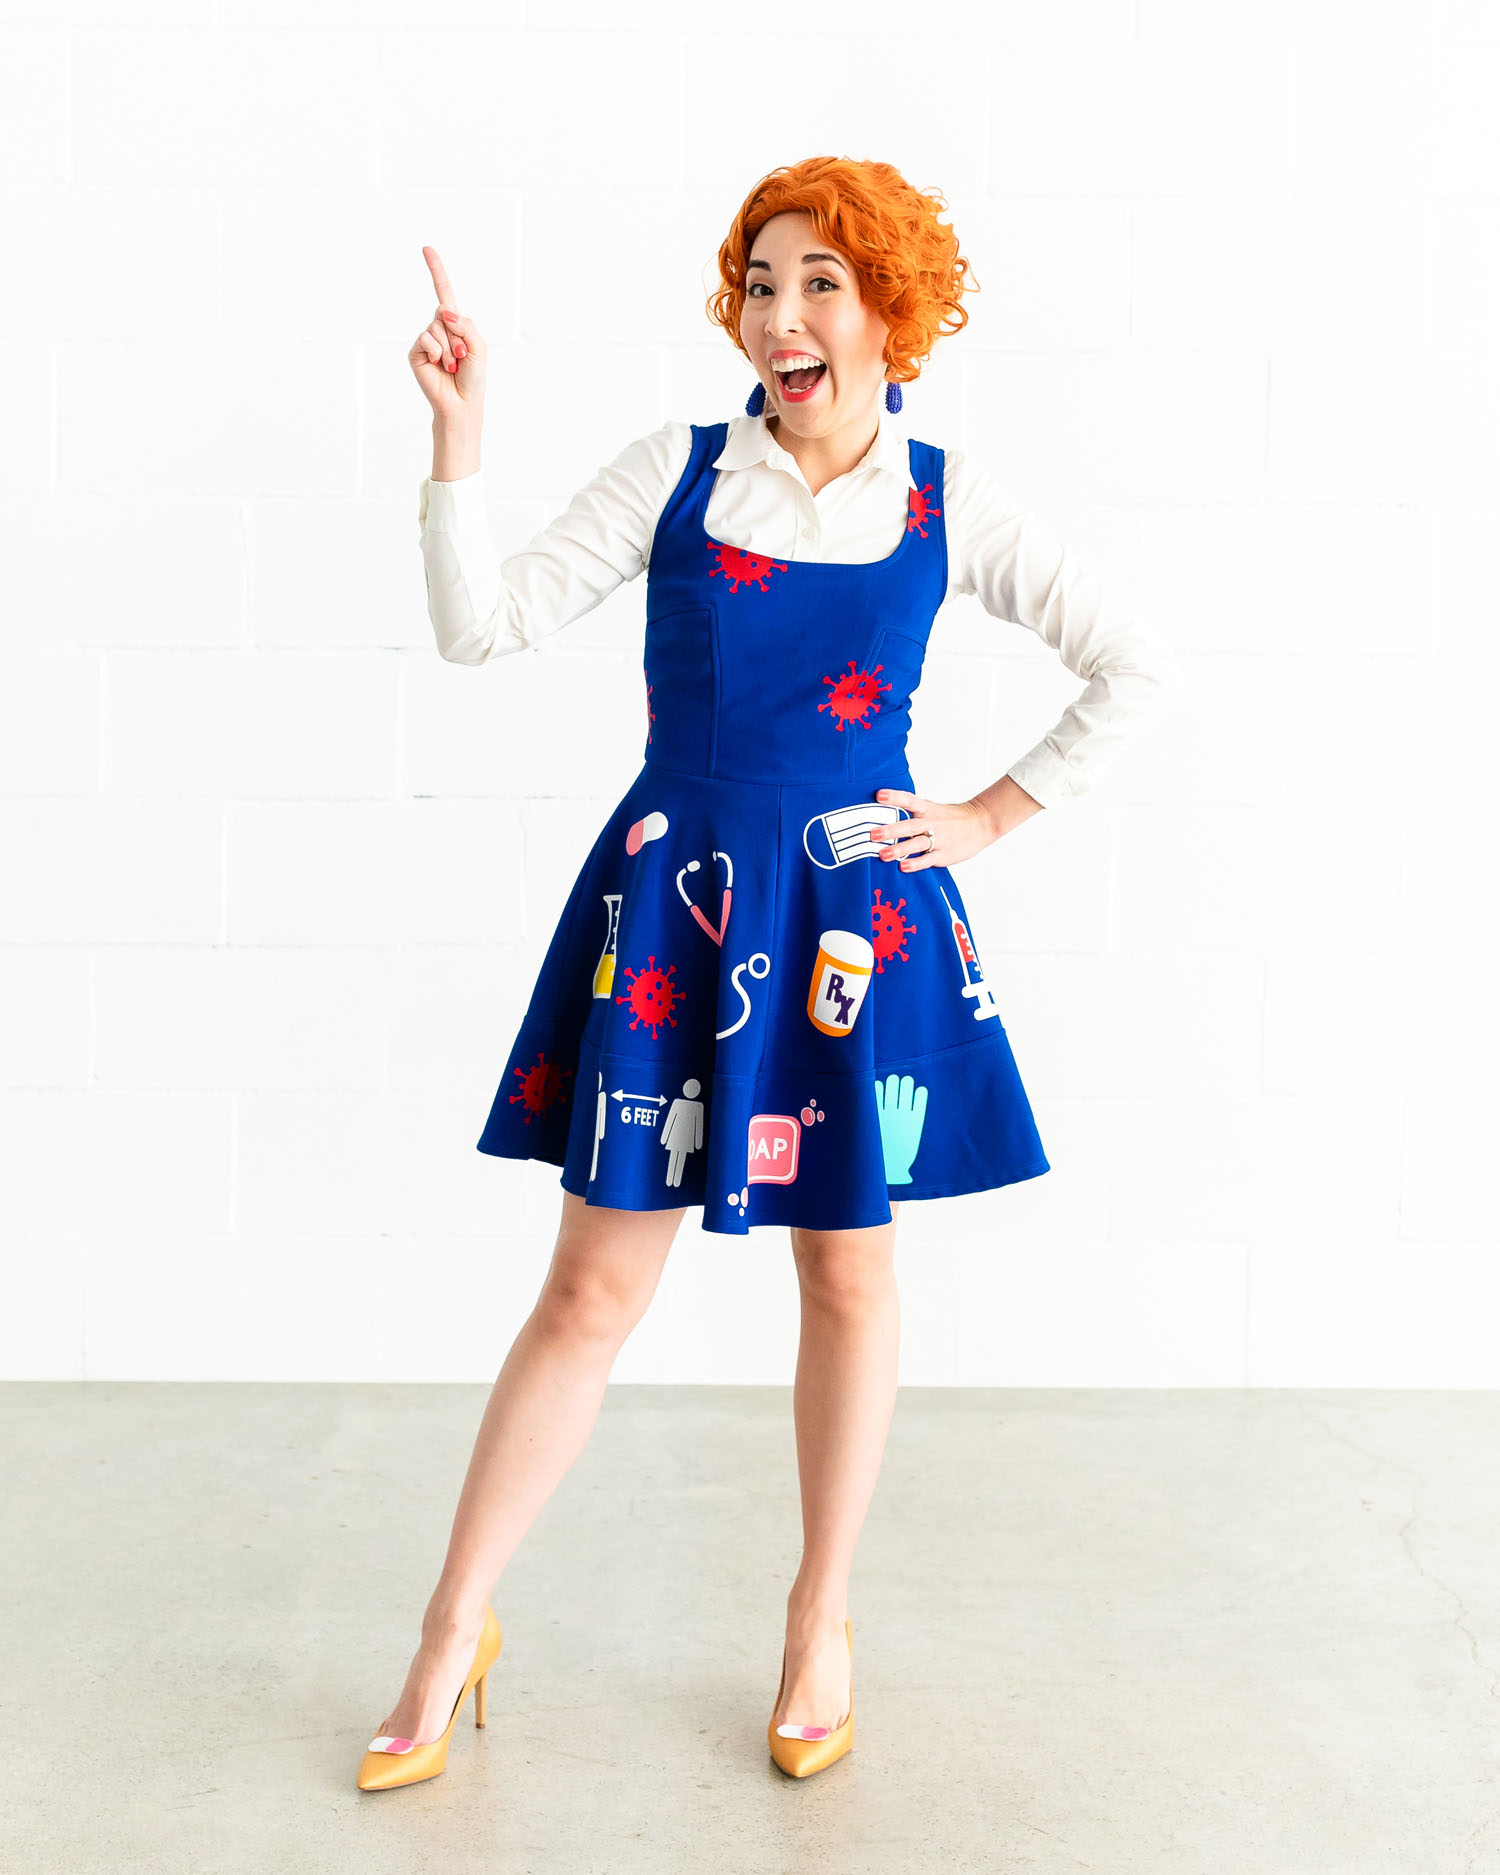 How To Make Your Own Ms. Frizzle Costume